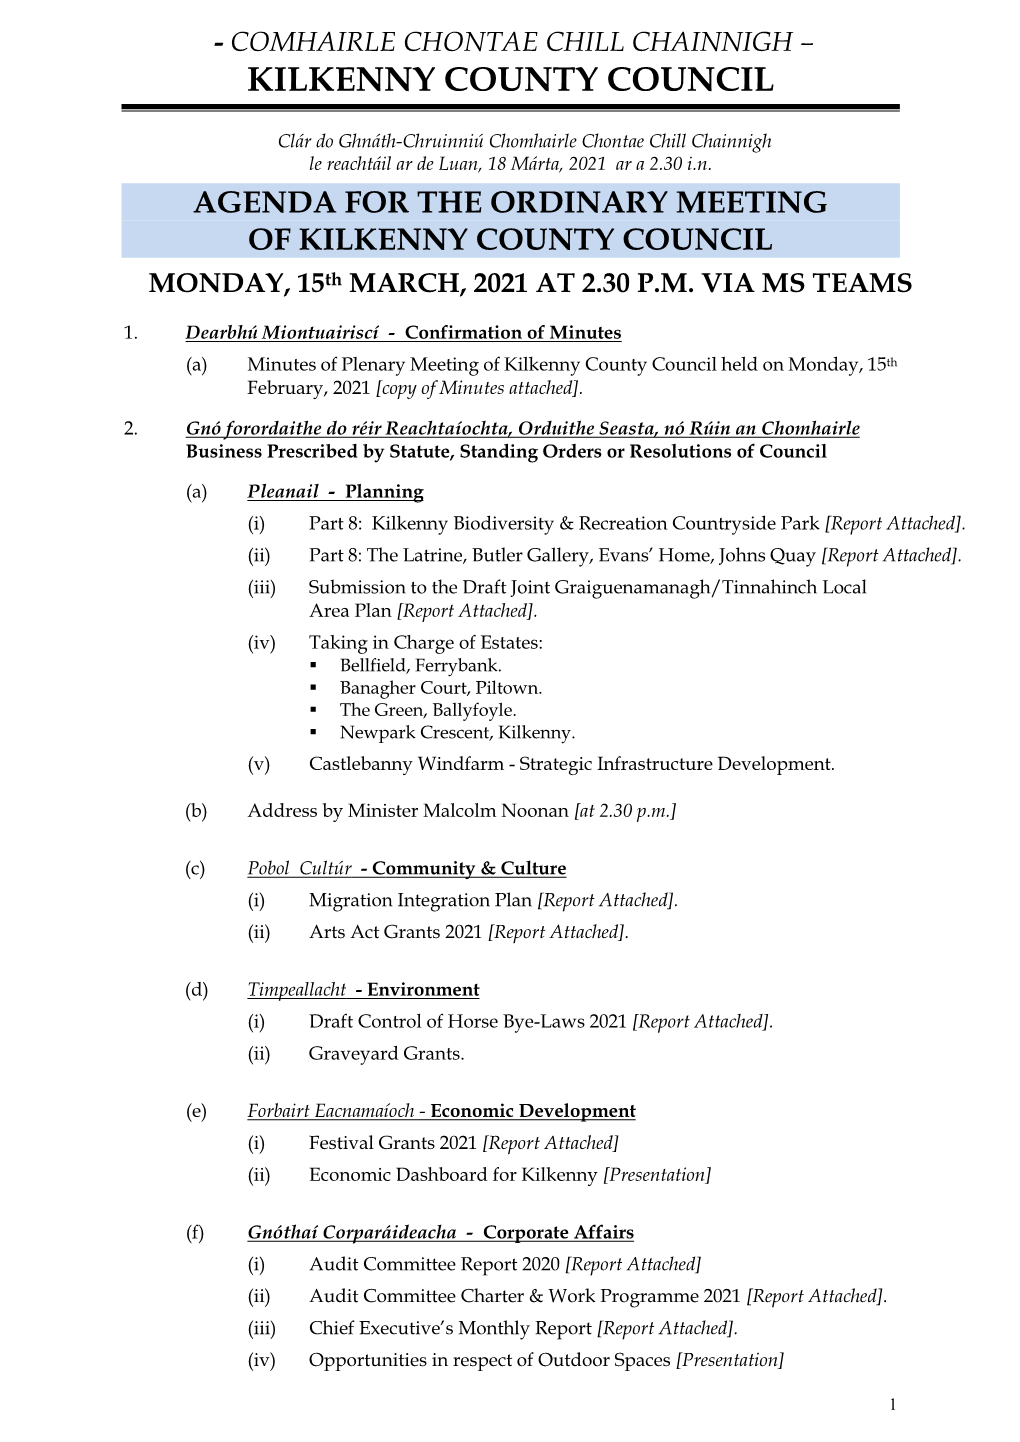 Agenda for the Ordinary Meeting of Kilkenny County Council